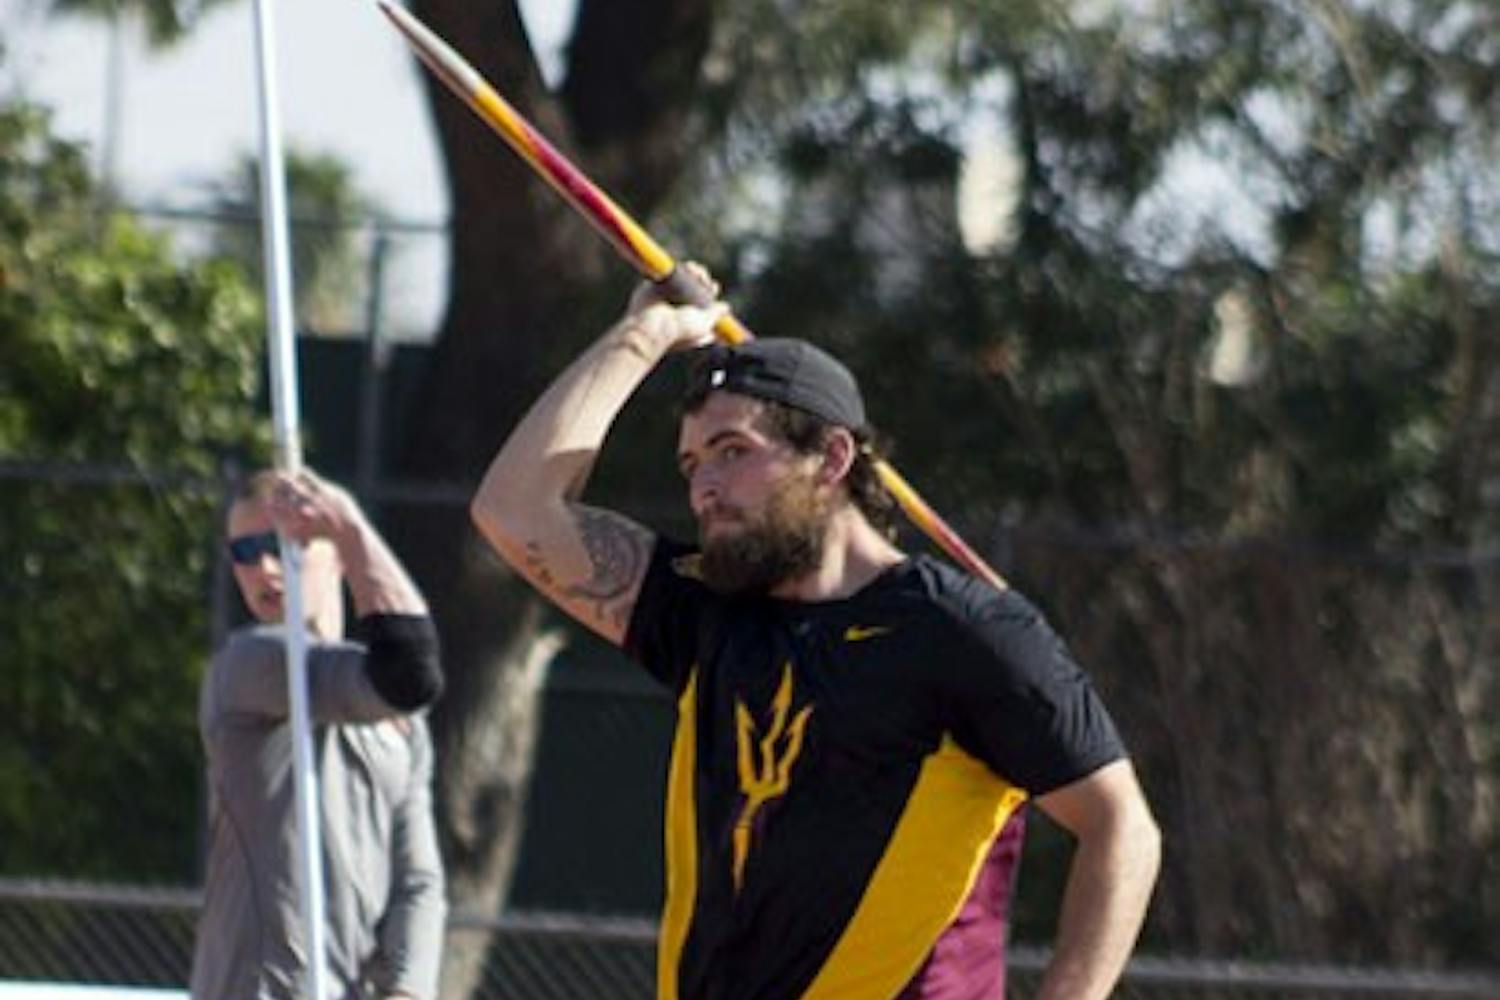 Senior thrower Eddie McClain gets set for a javelin throw during the ASU Invitational on March 23. McClain is part of a cohesive throwers unit whose bond has created success on the ASU track and field program. (Photo by Ana Ramirez)